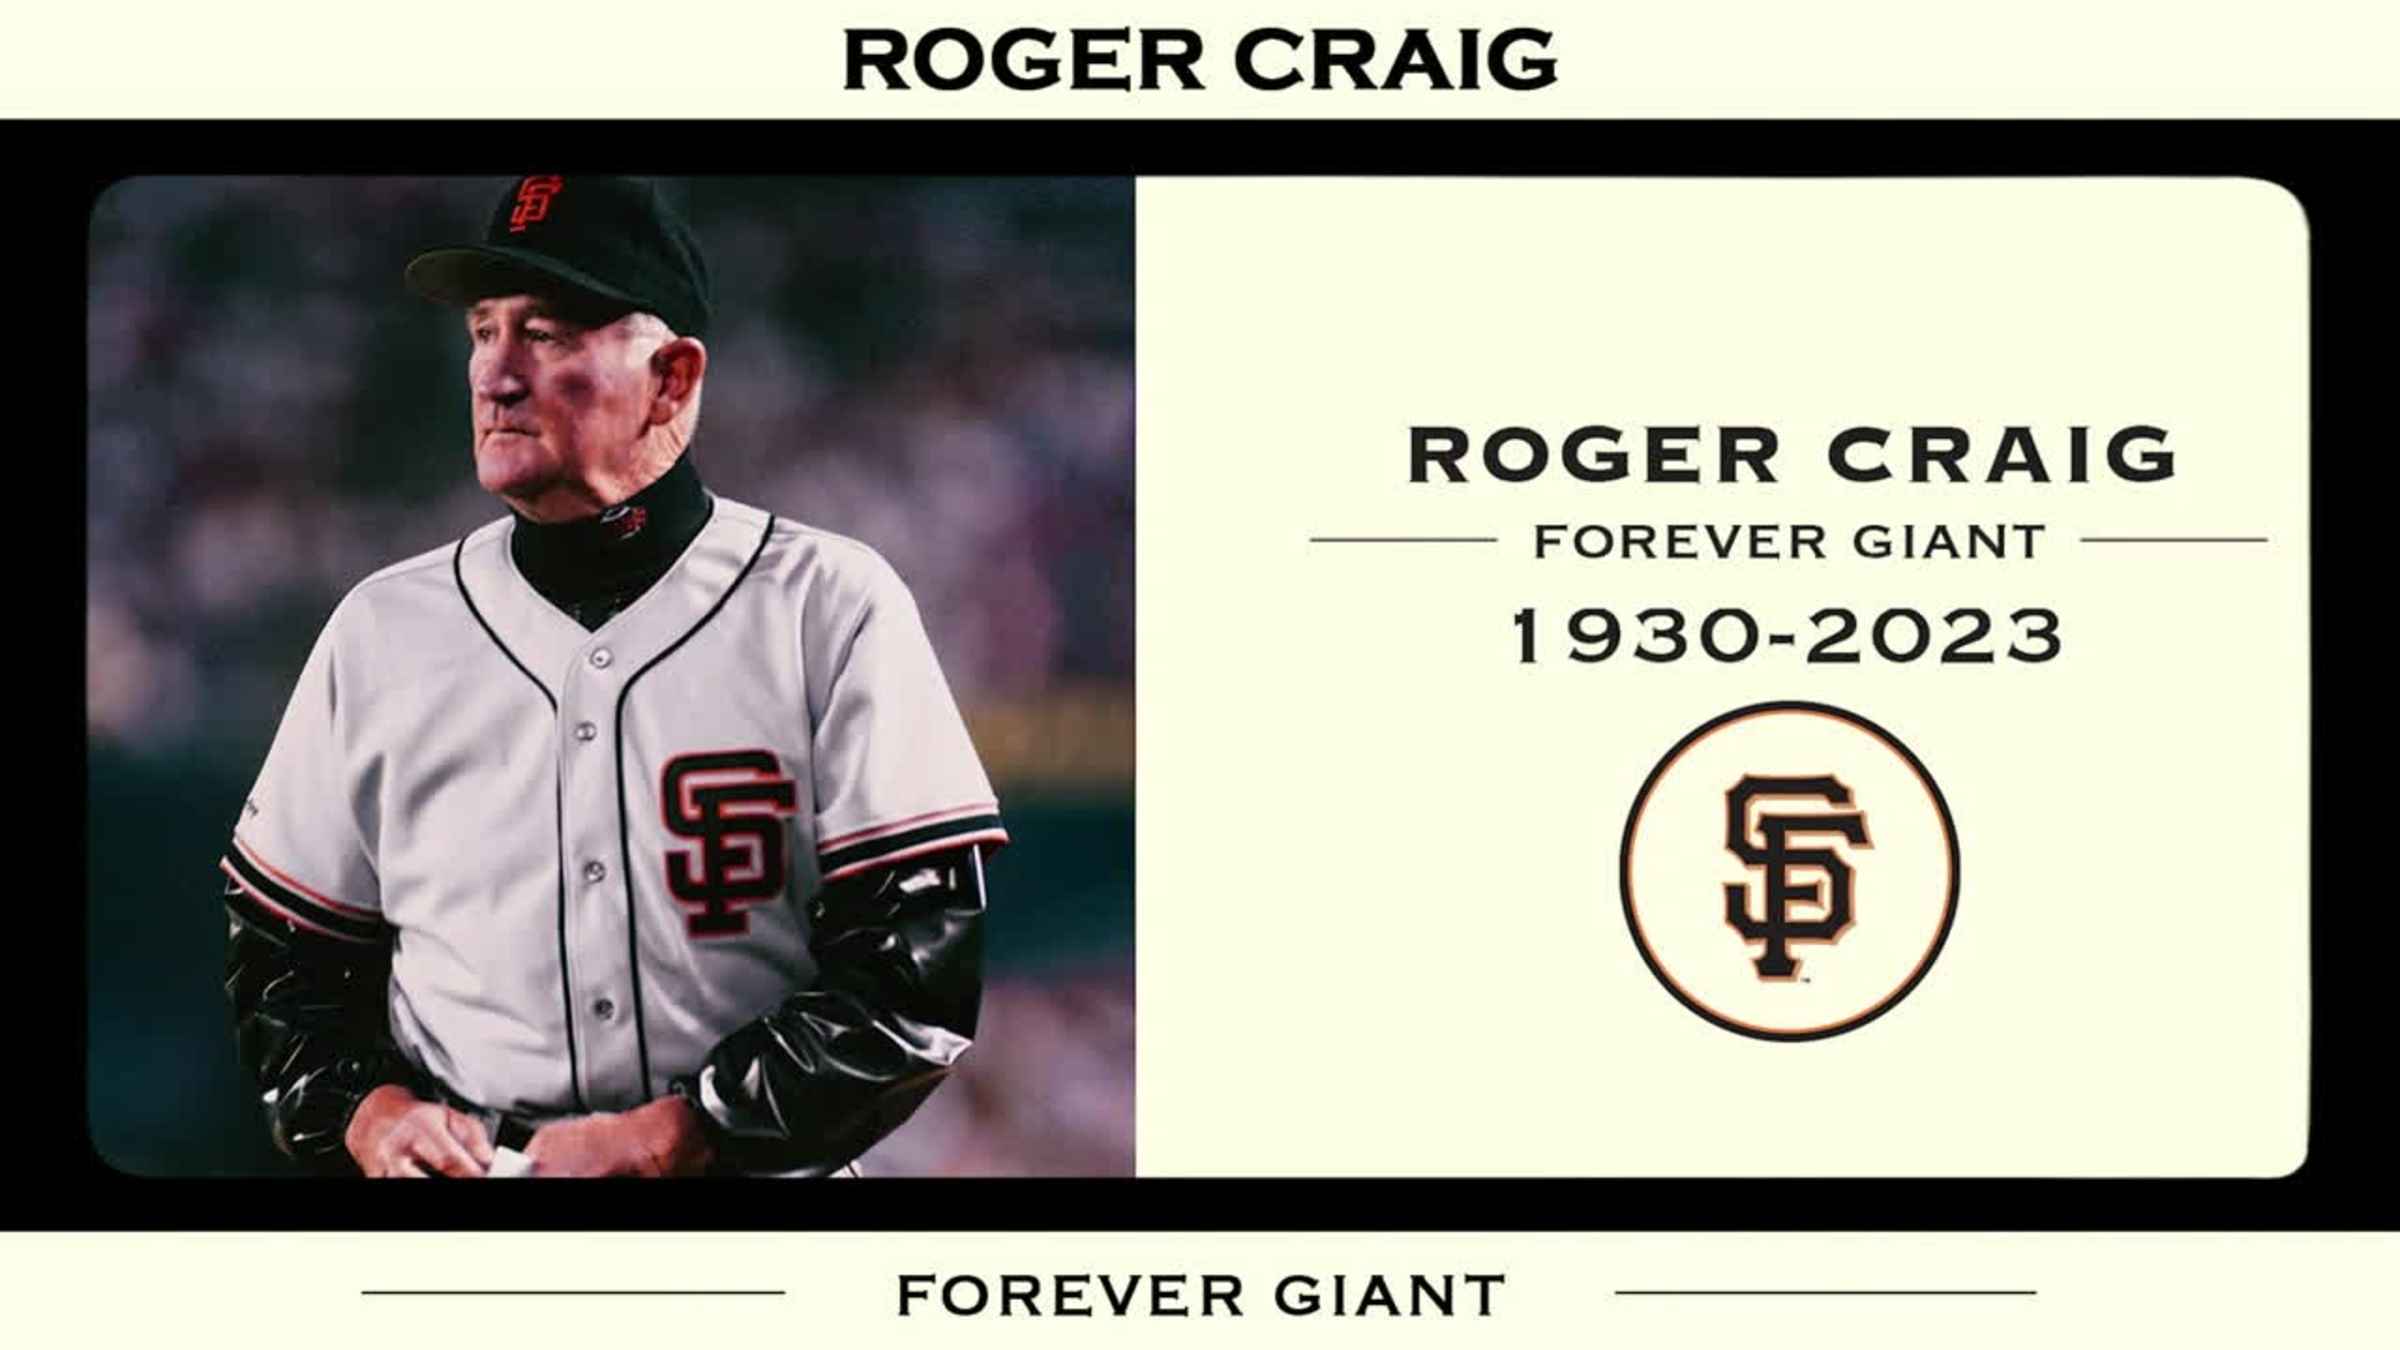 MLB - The Giants and Mariners paid tribute to the Negro